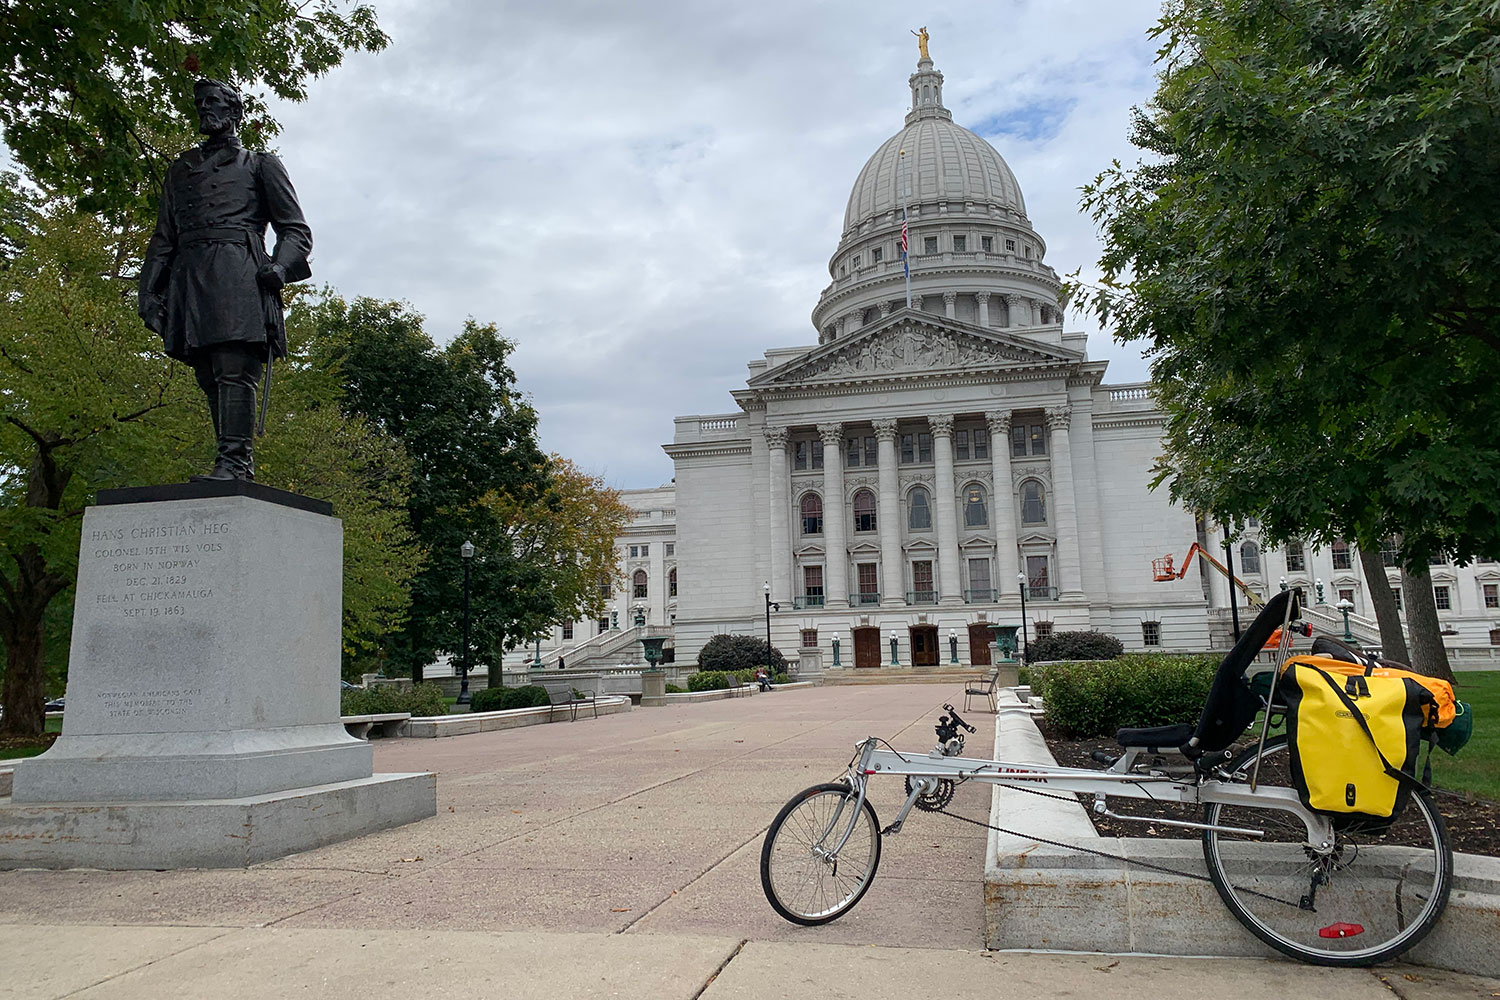 Starting the ride at the State Capitol